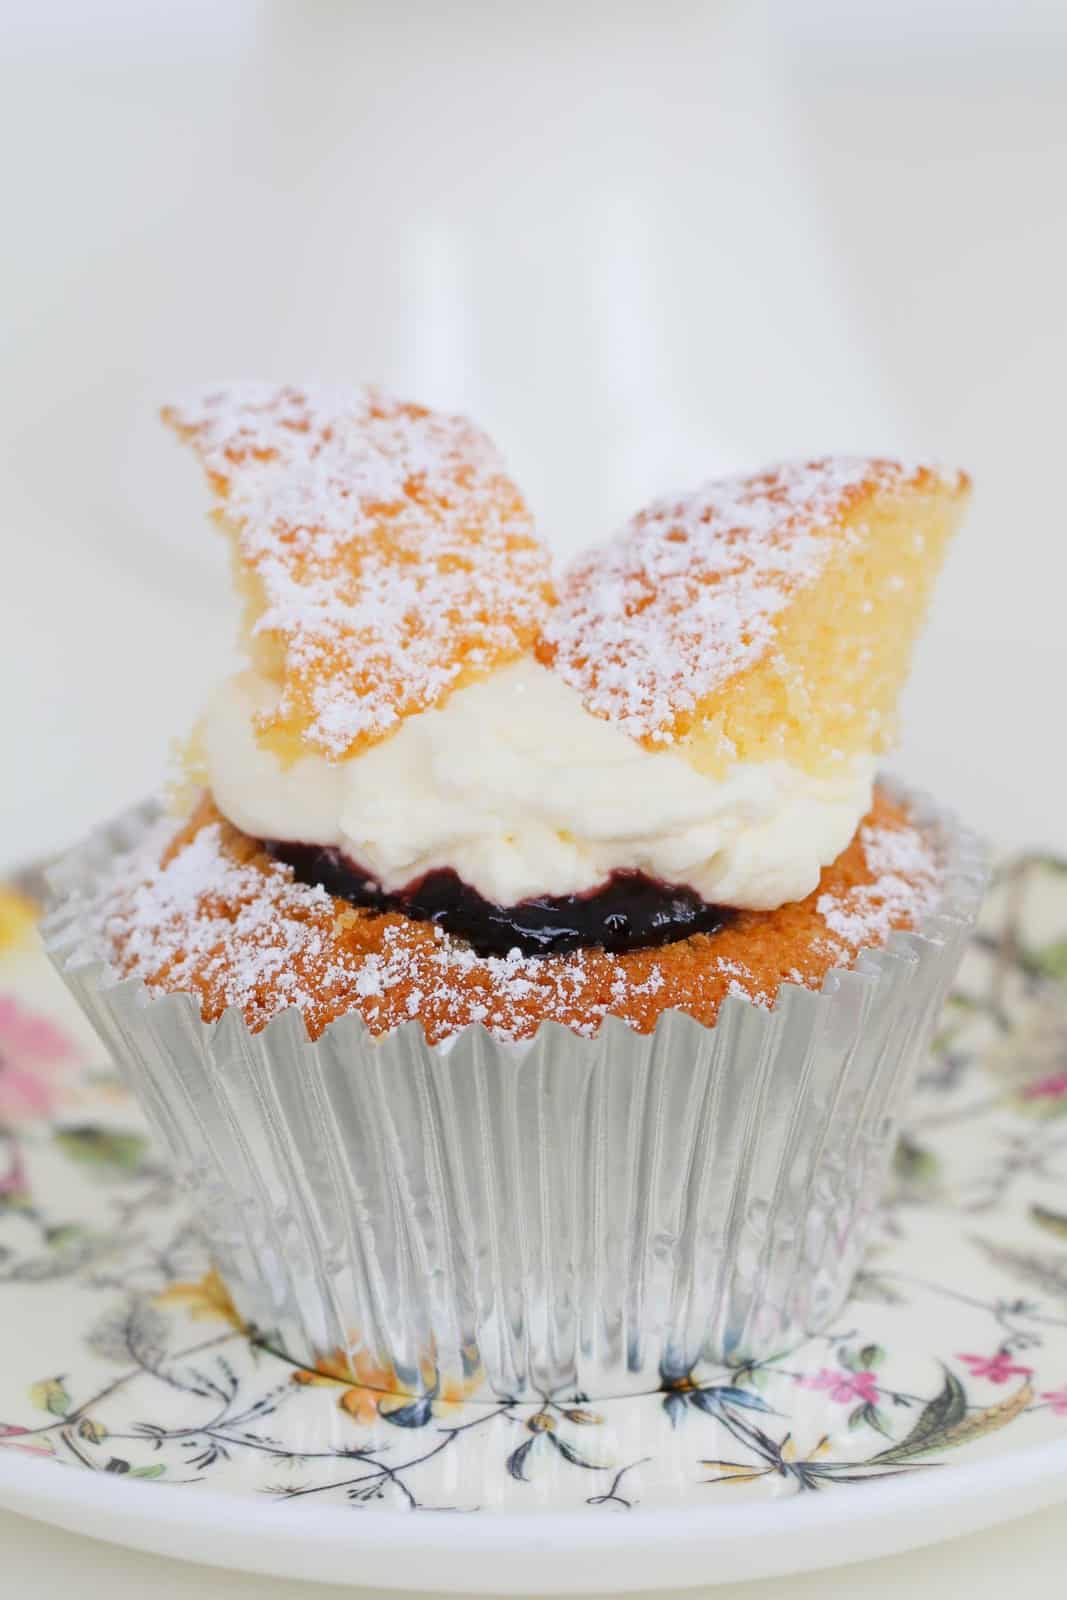 A close up of a silver cupcake case holding a vanilla fairy cupcake with jam and cream, and dusted with icing sugar.